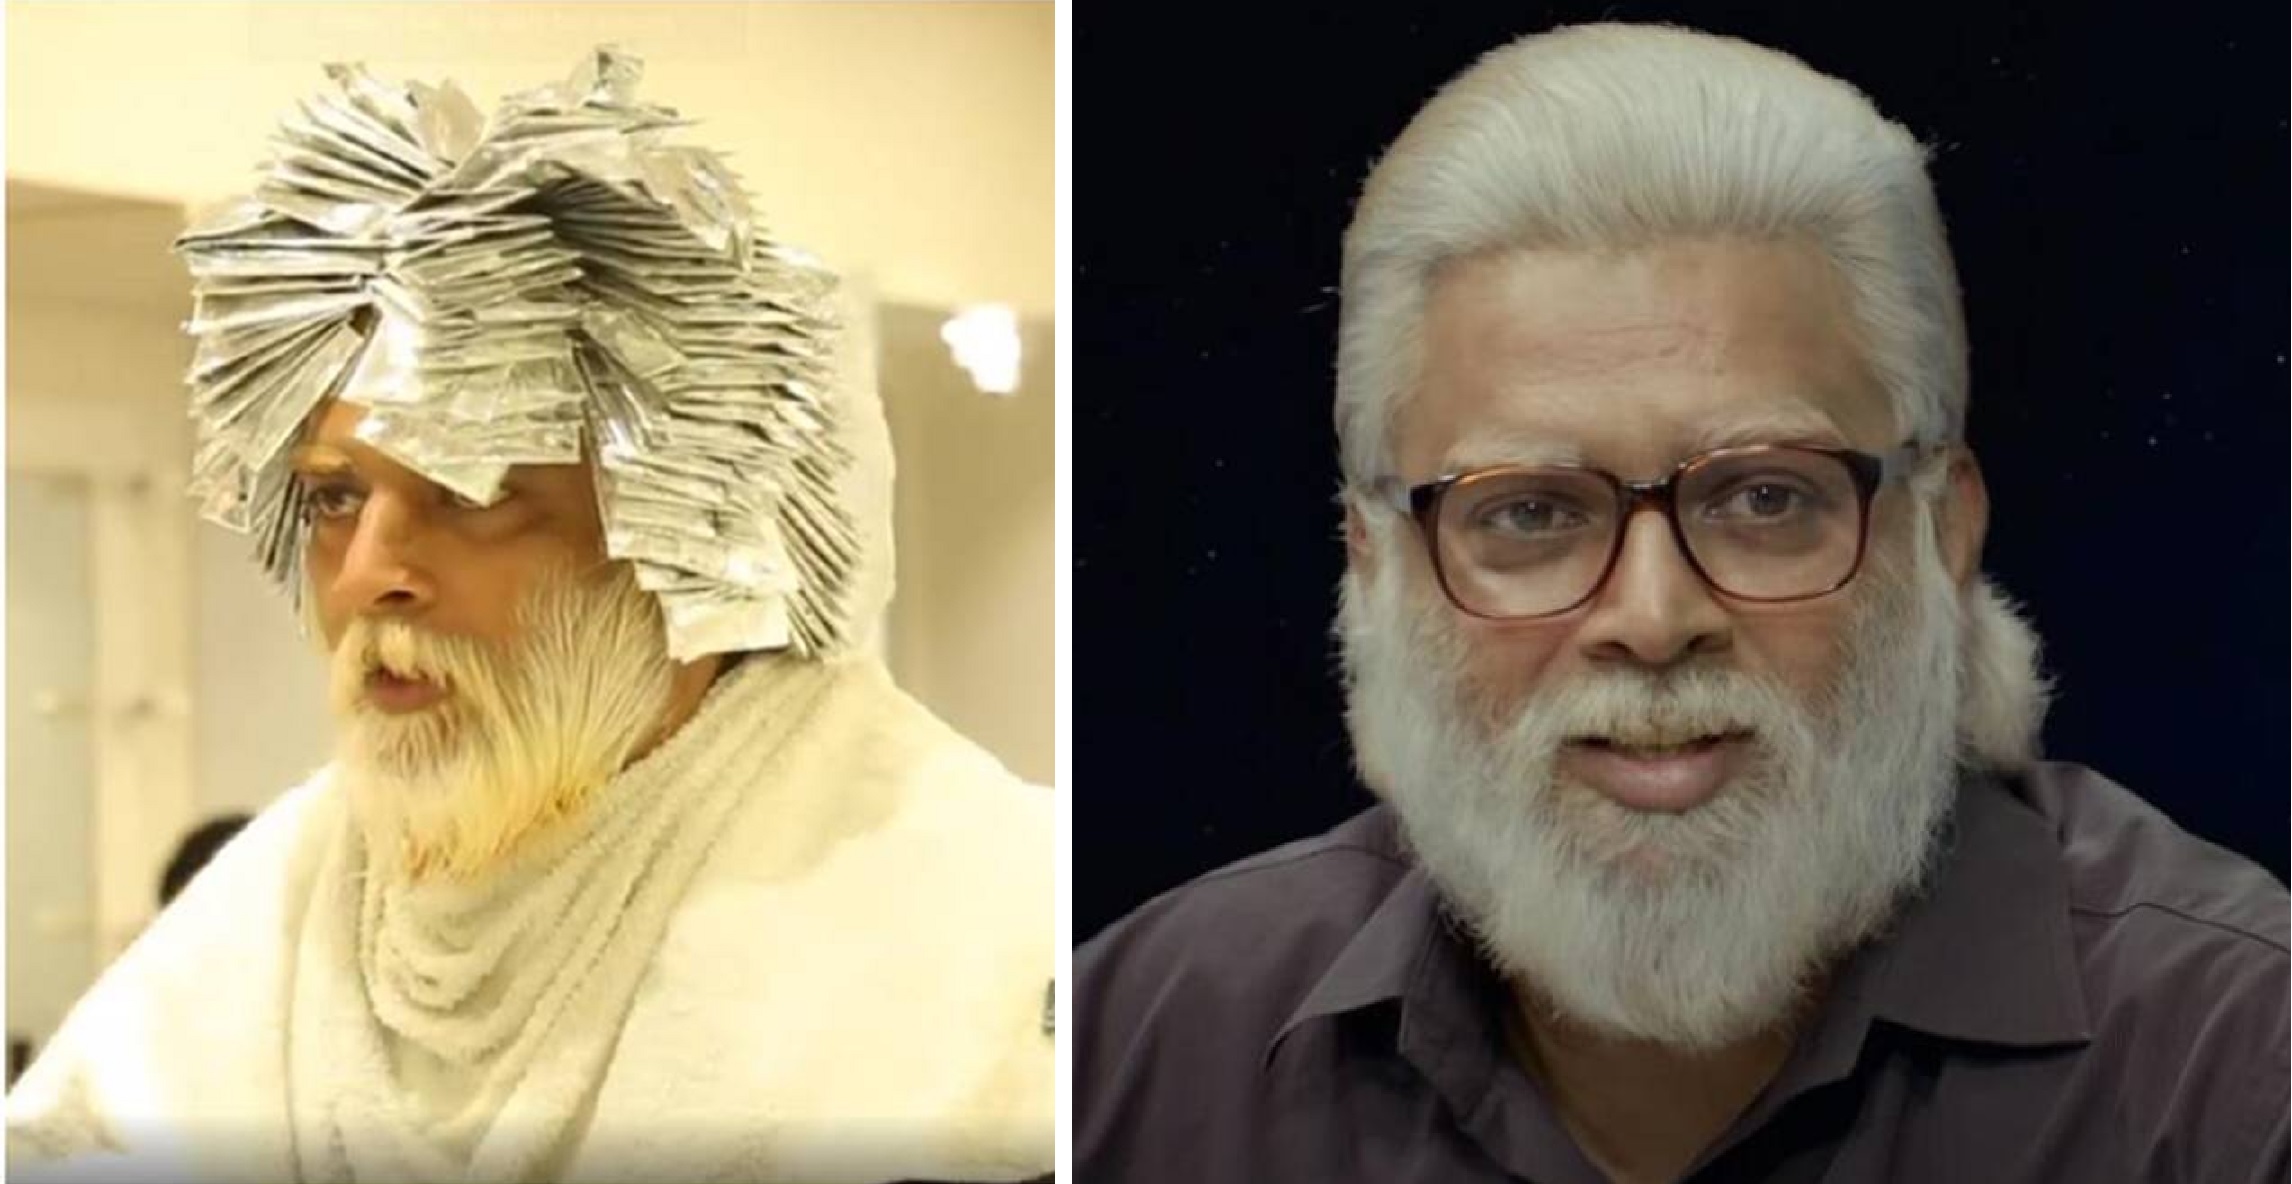 R Madhavan’s EPIC Tranformation Into ISRO Scientist Nambi Narayan For New Film Will Blow Your Mind